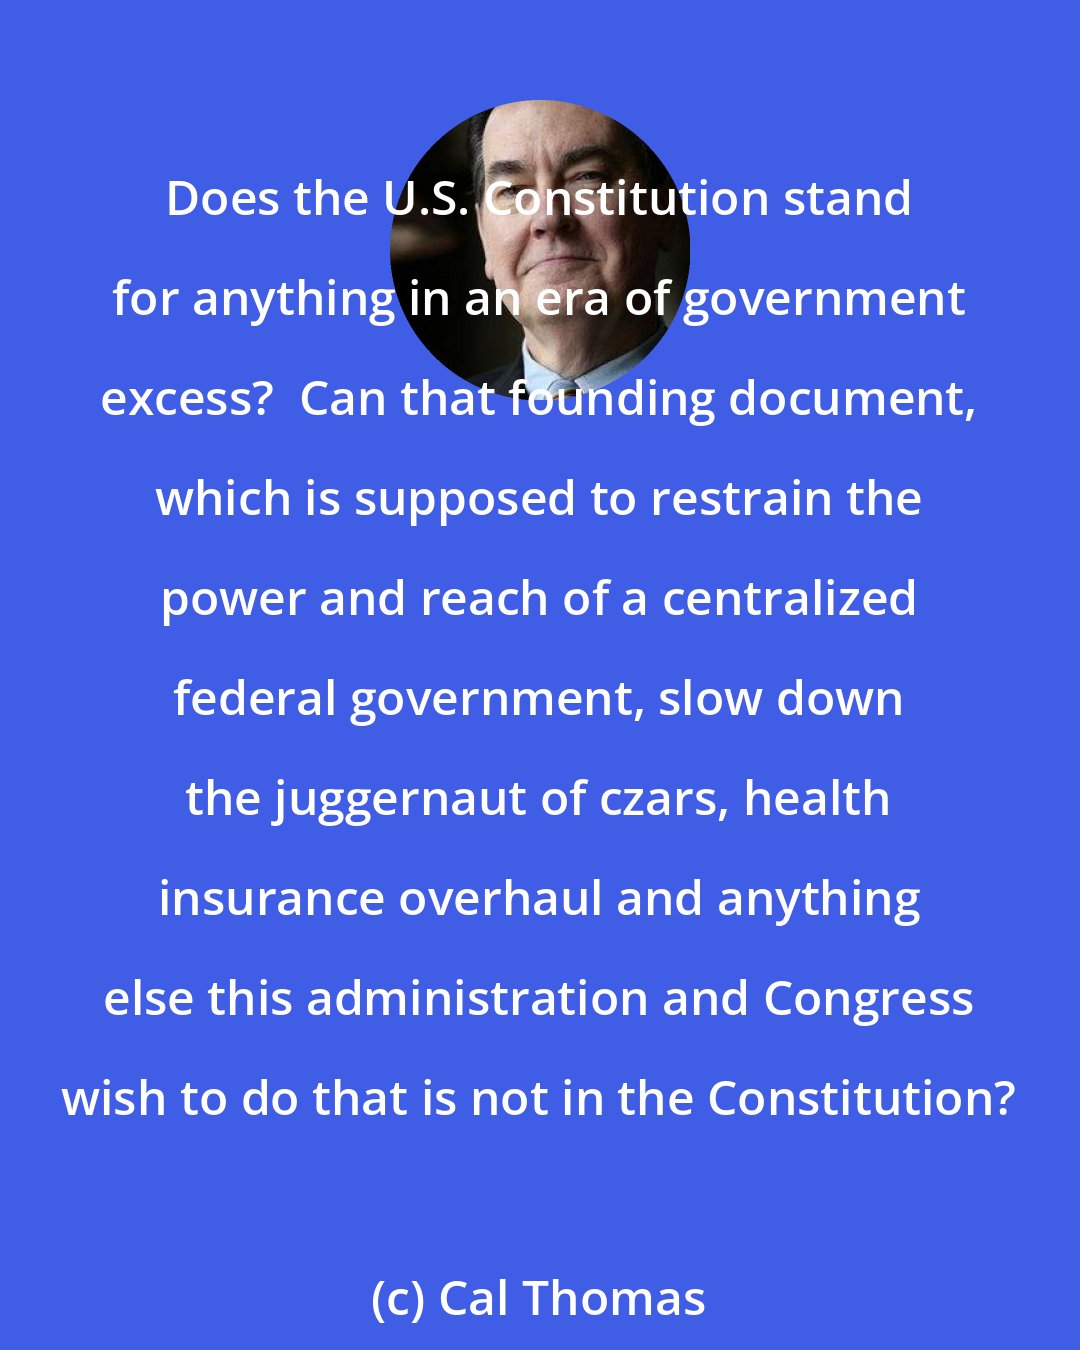 Cal Thomas: Does the U.S. Constitution stand for anything in an era of government excess?  Can that founding document, which is supposed to restrain the power and reach of a centralized federal government, slow down the juggernaut of czars, health insurance overhaul and anything else this administration and Congress wish to do that is not in the Constitution?